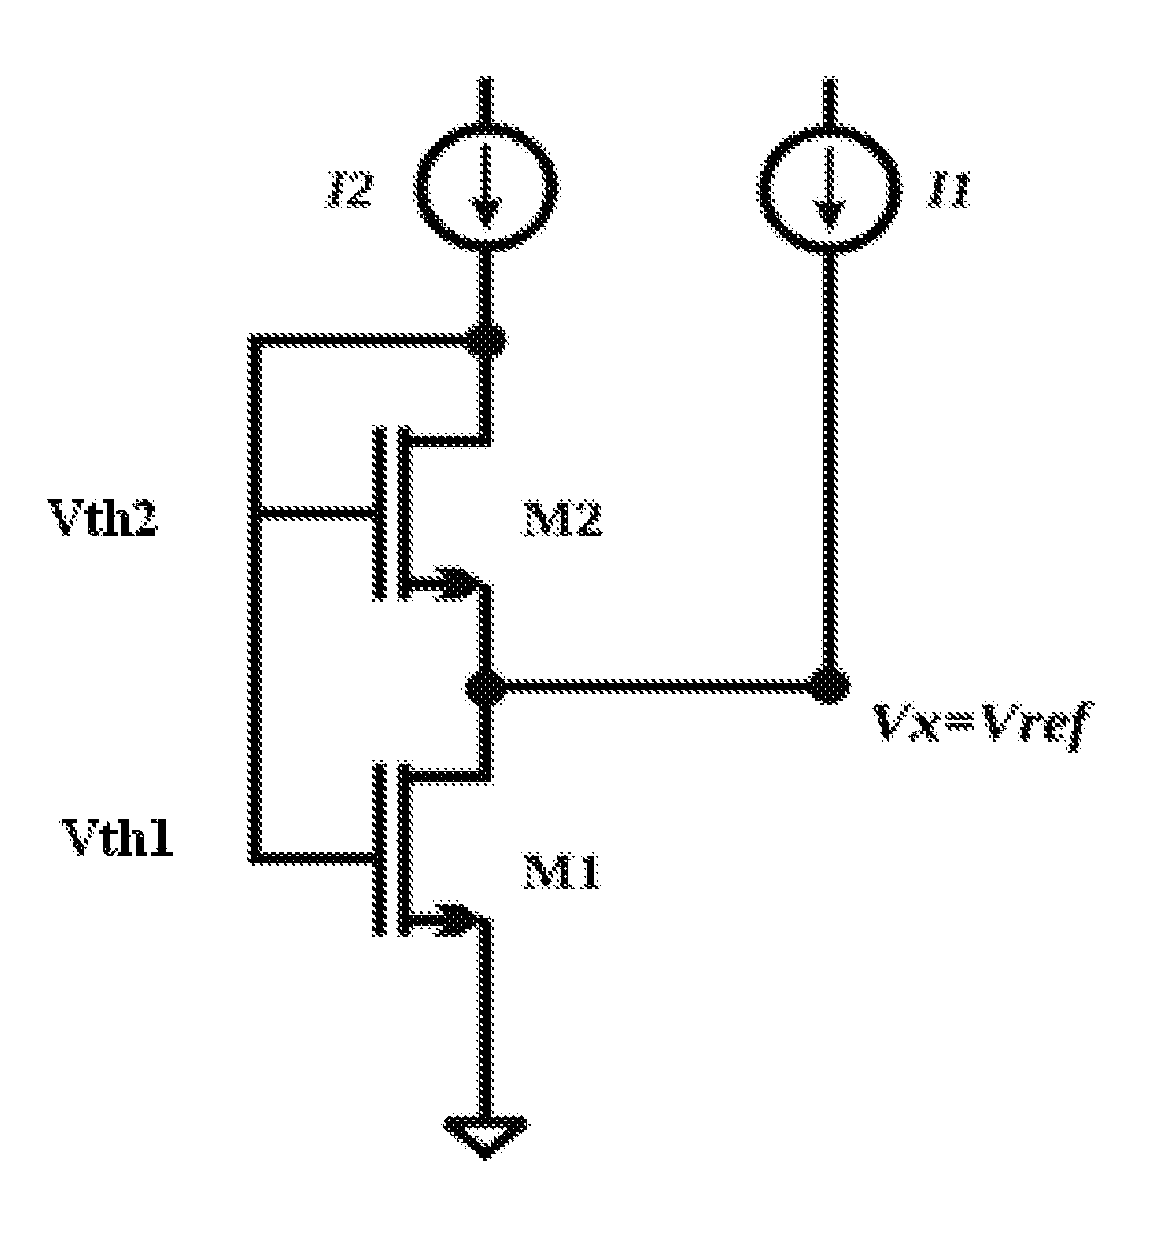 Temperature-Compensated Reference Voltage System With Very Low Power Consumption Based On An SCM Structure With Transistors Of Different Threshold Voltages